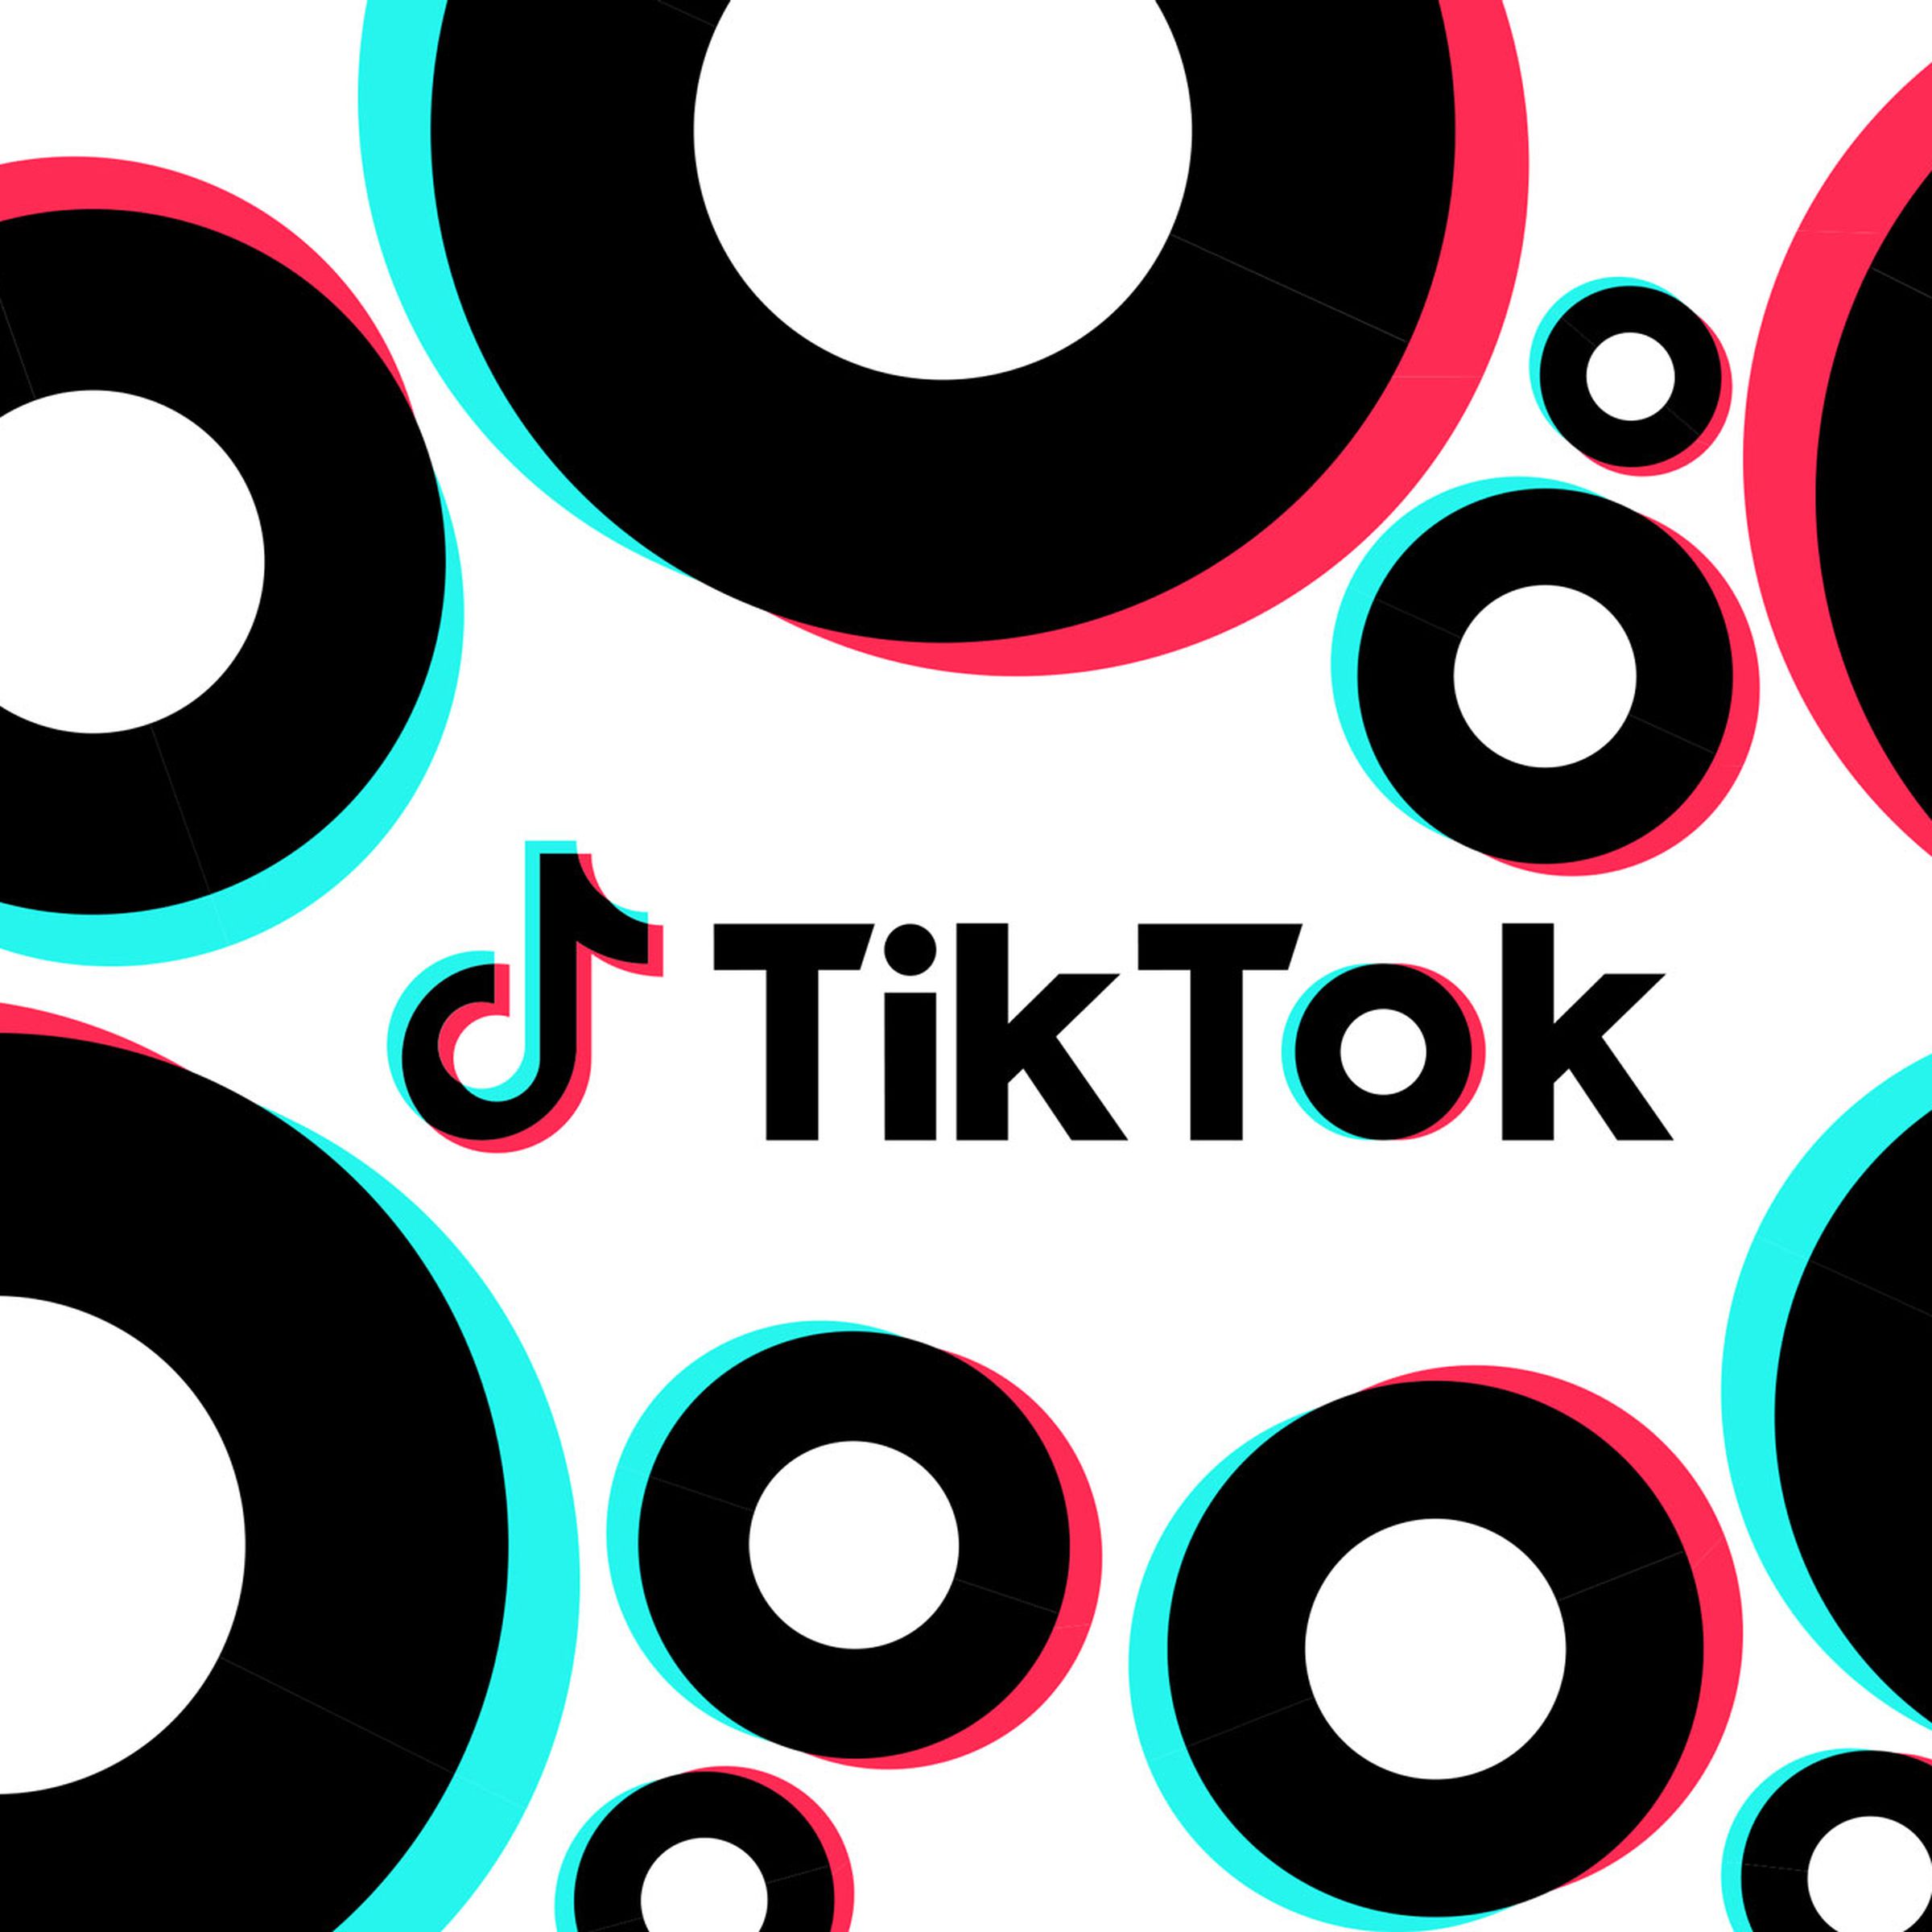 The TikTok logo on a white background with repeating circle imagery scattered throughout.